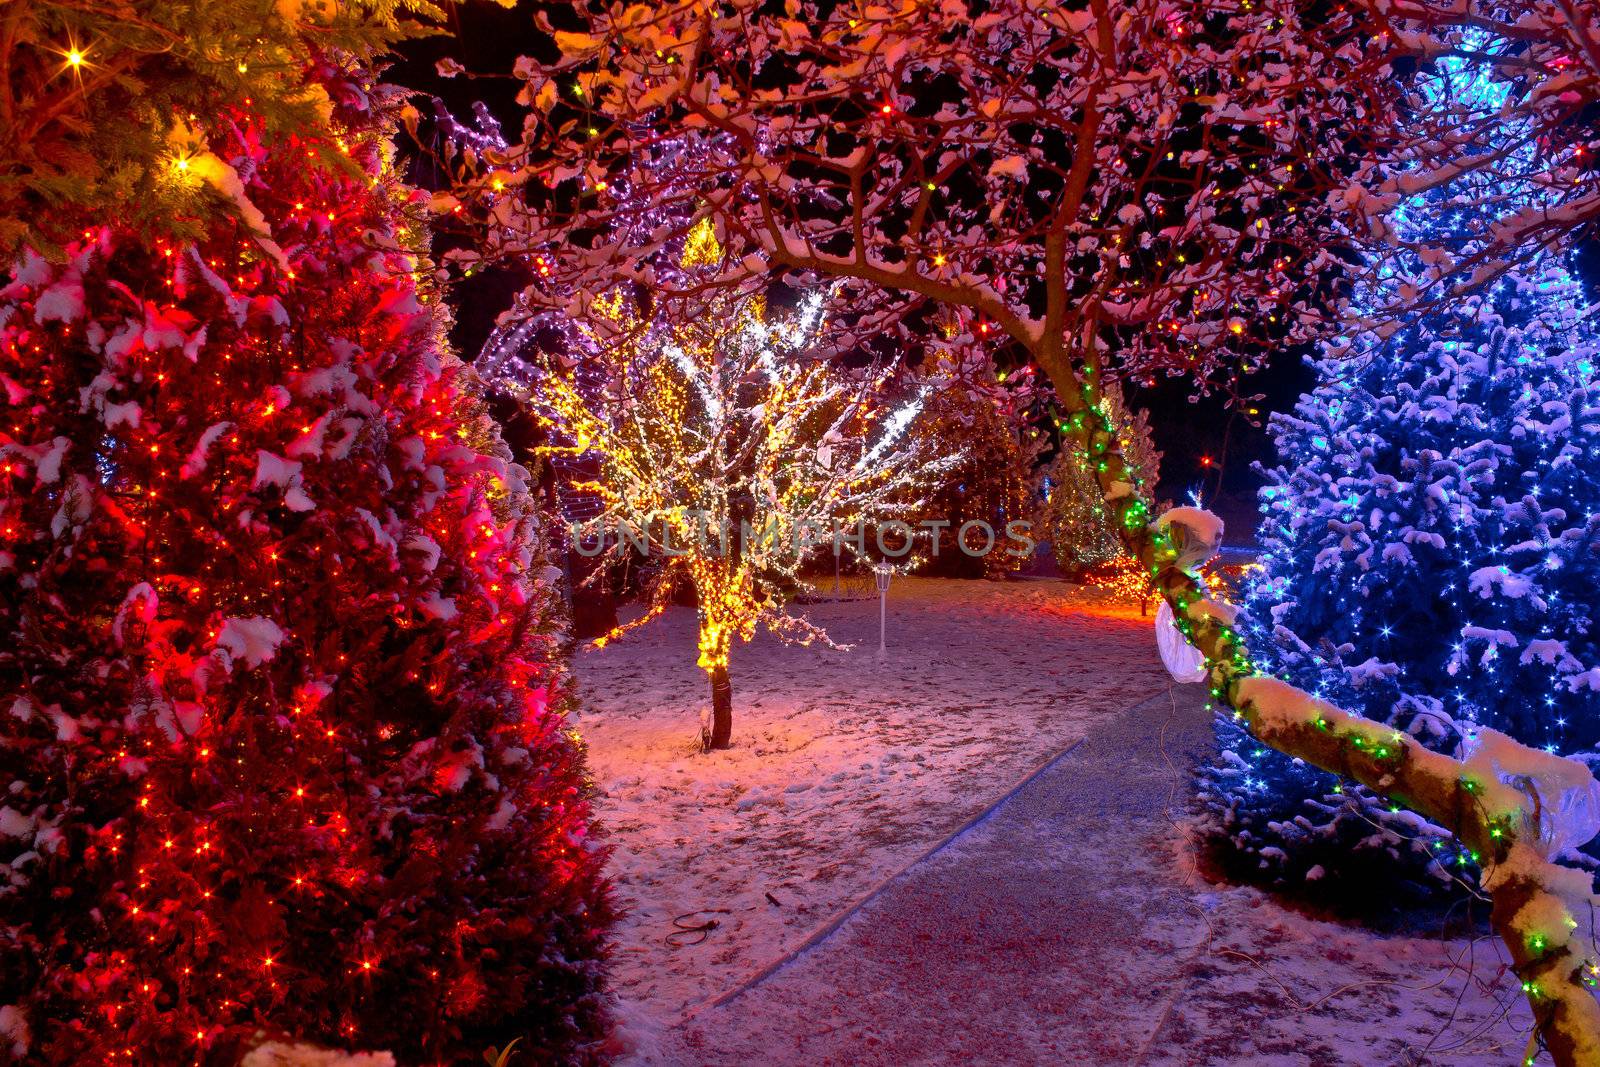 Colorful Christmas lights on trees, glowing nature